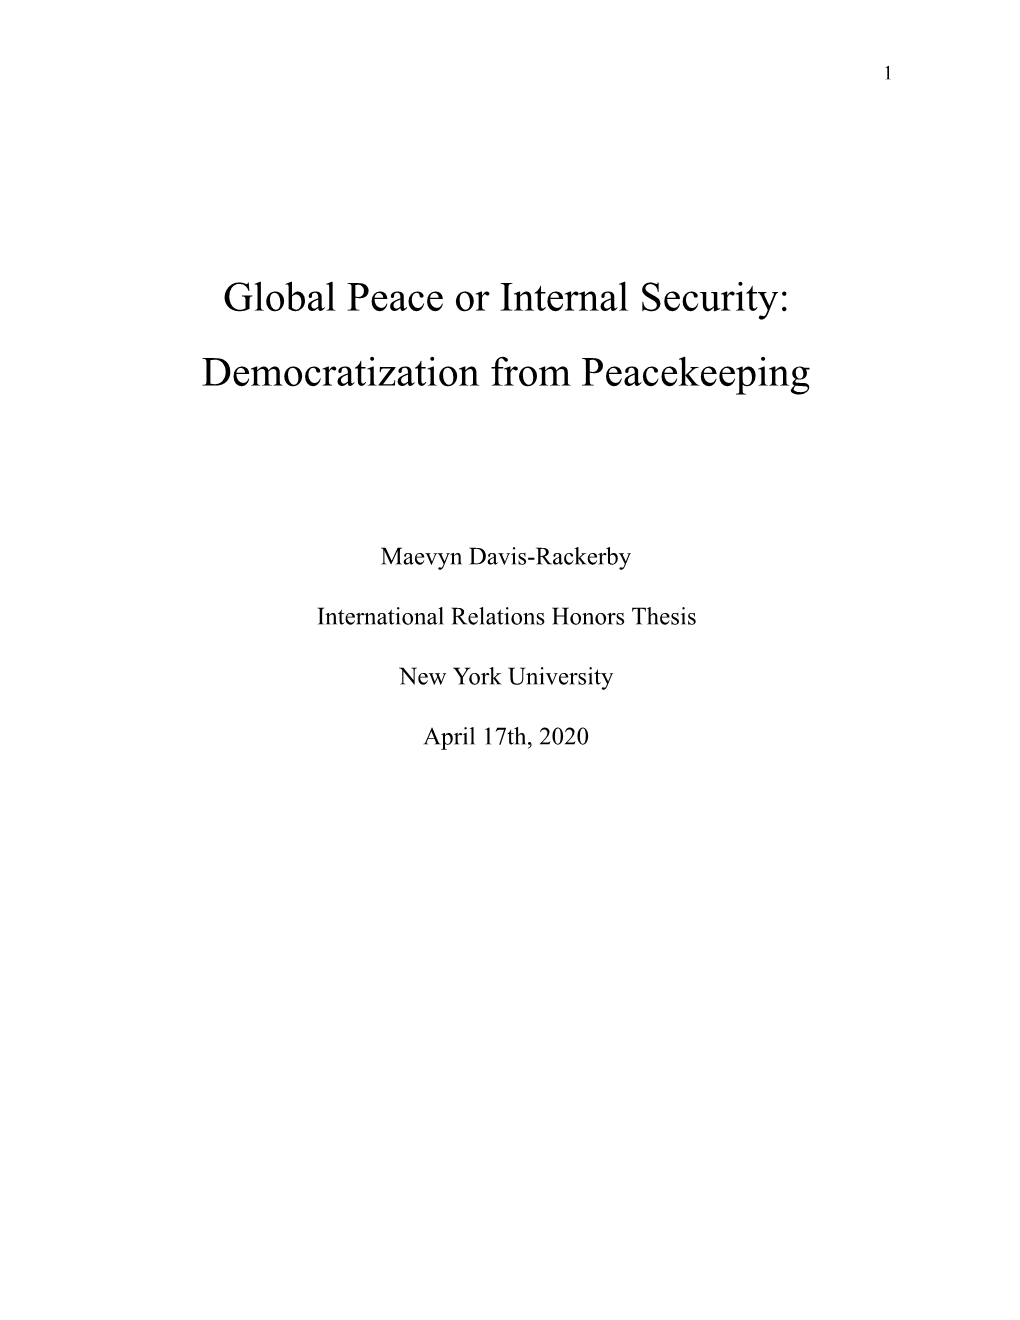 Global Peace Or Internal Security: Democratization from Peacekeeping